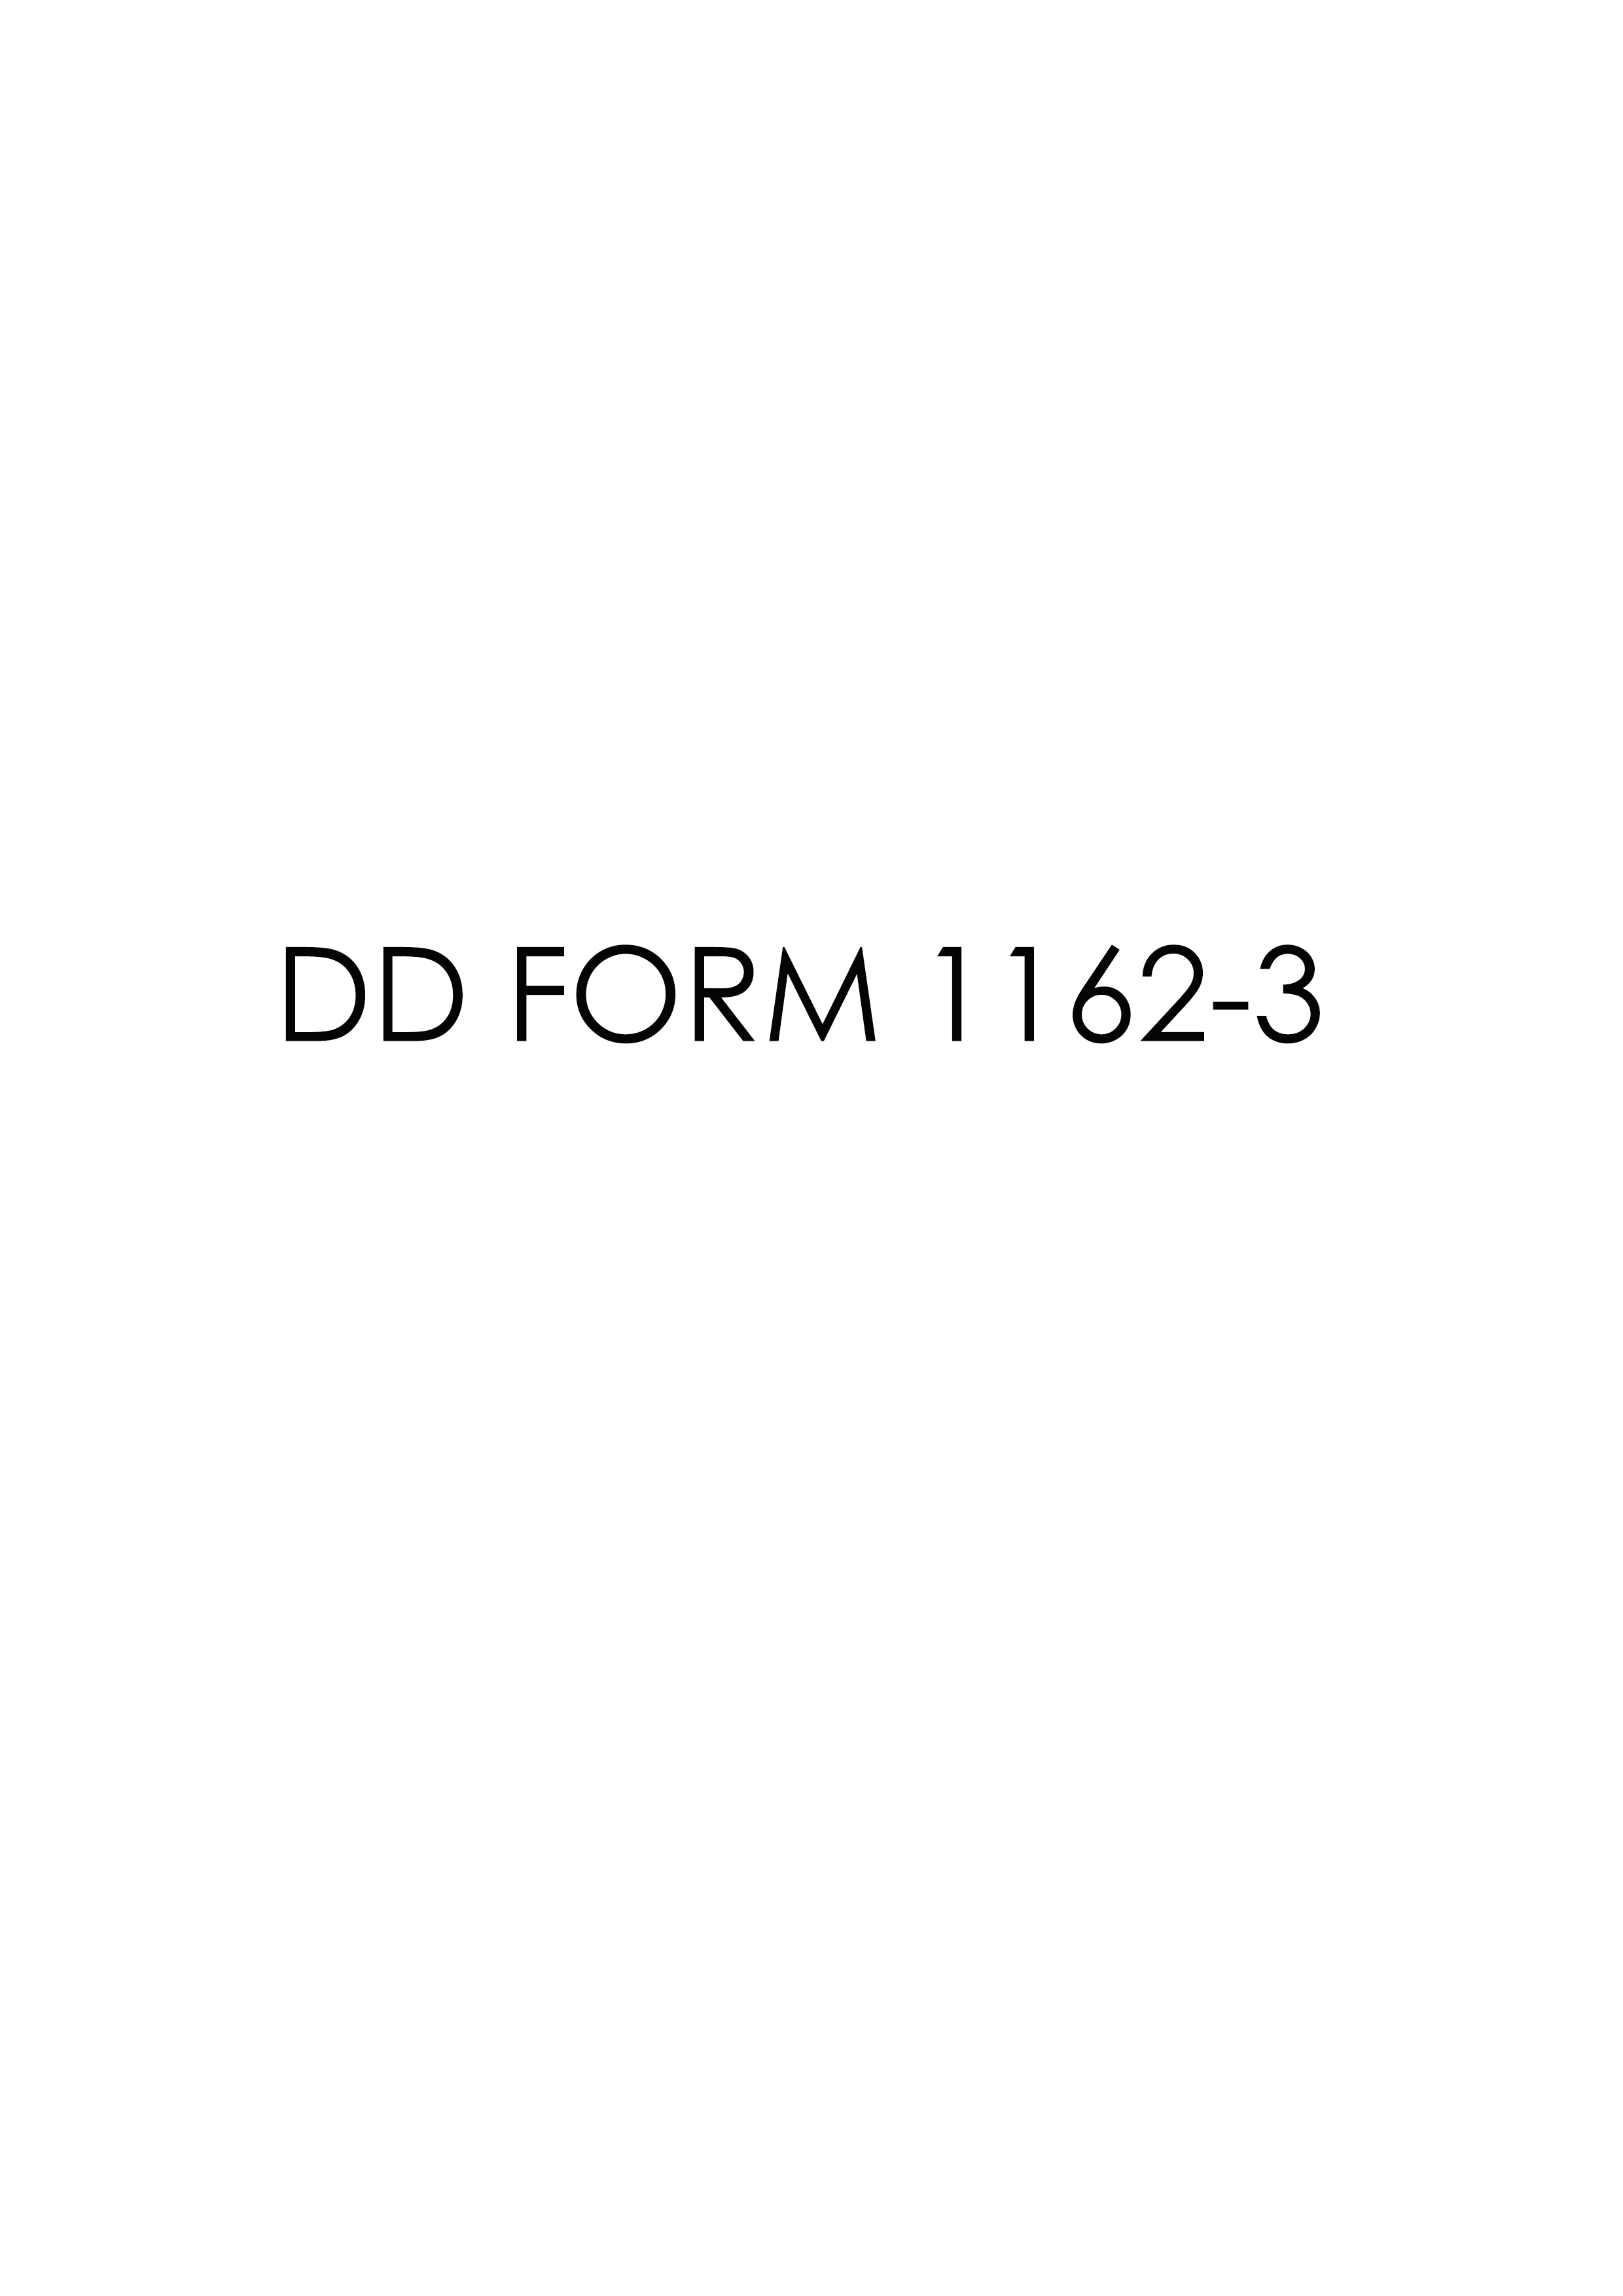 dd Form 1162-3 fillable